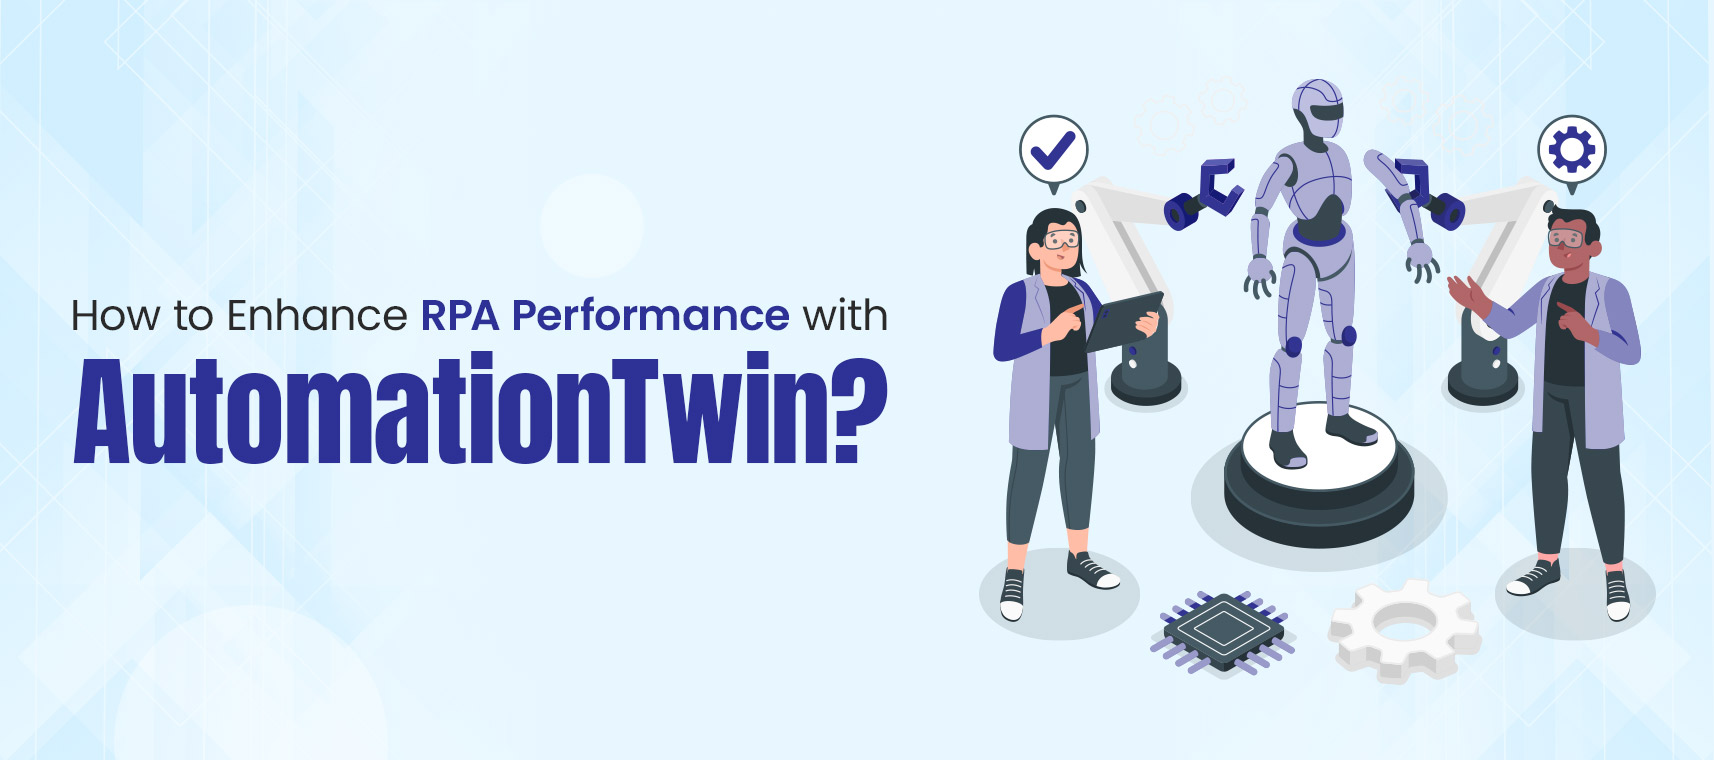 How to Enhance RPA Performance with AutomationTwin? - TFTus